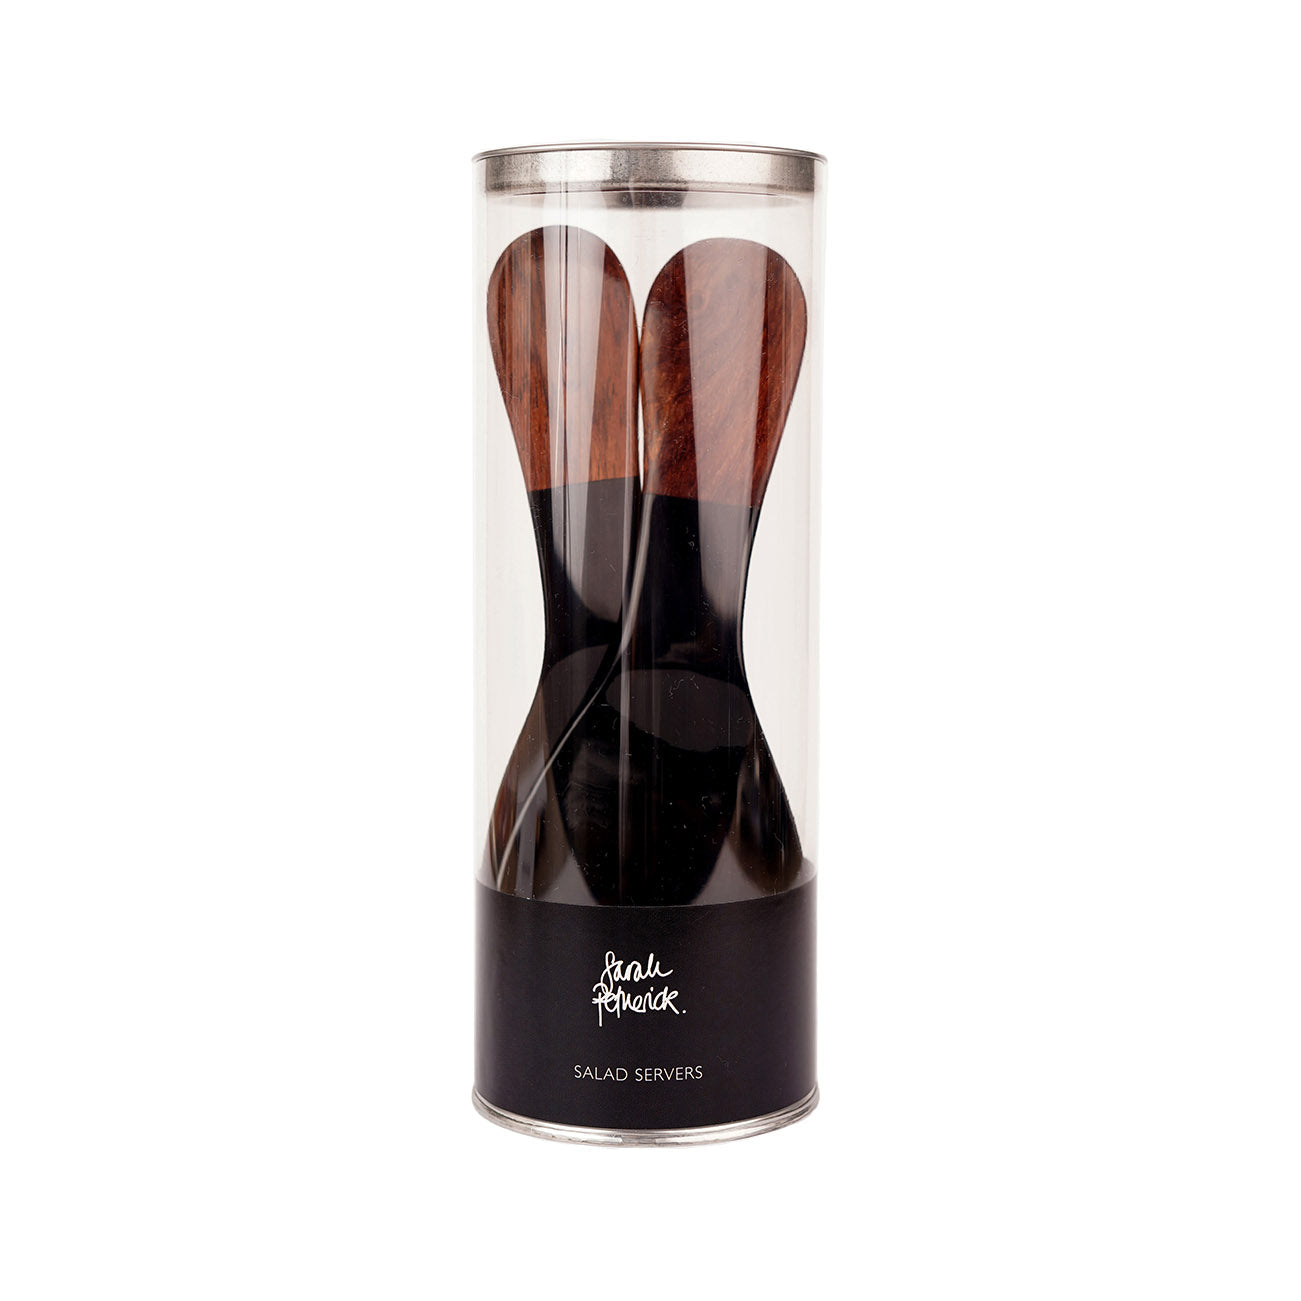 A pair of black water buffalo horn salad servers with rosewood handles, packaged in a clear tube